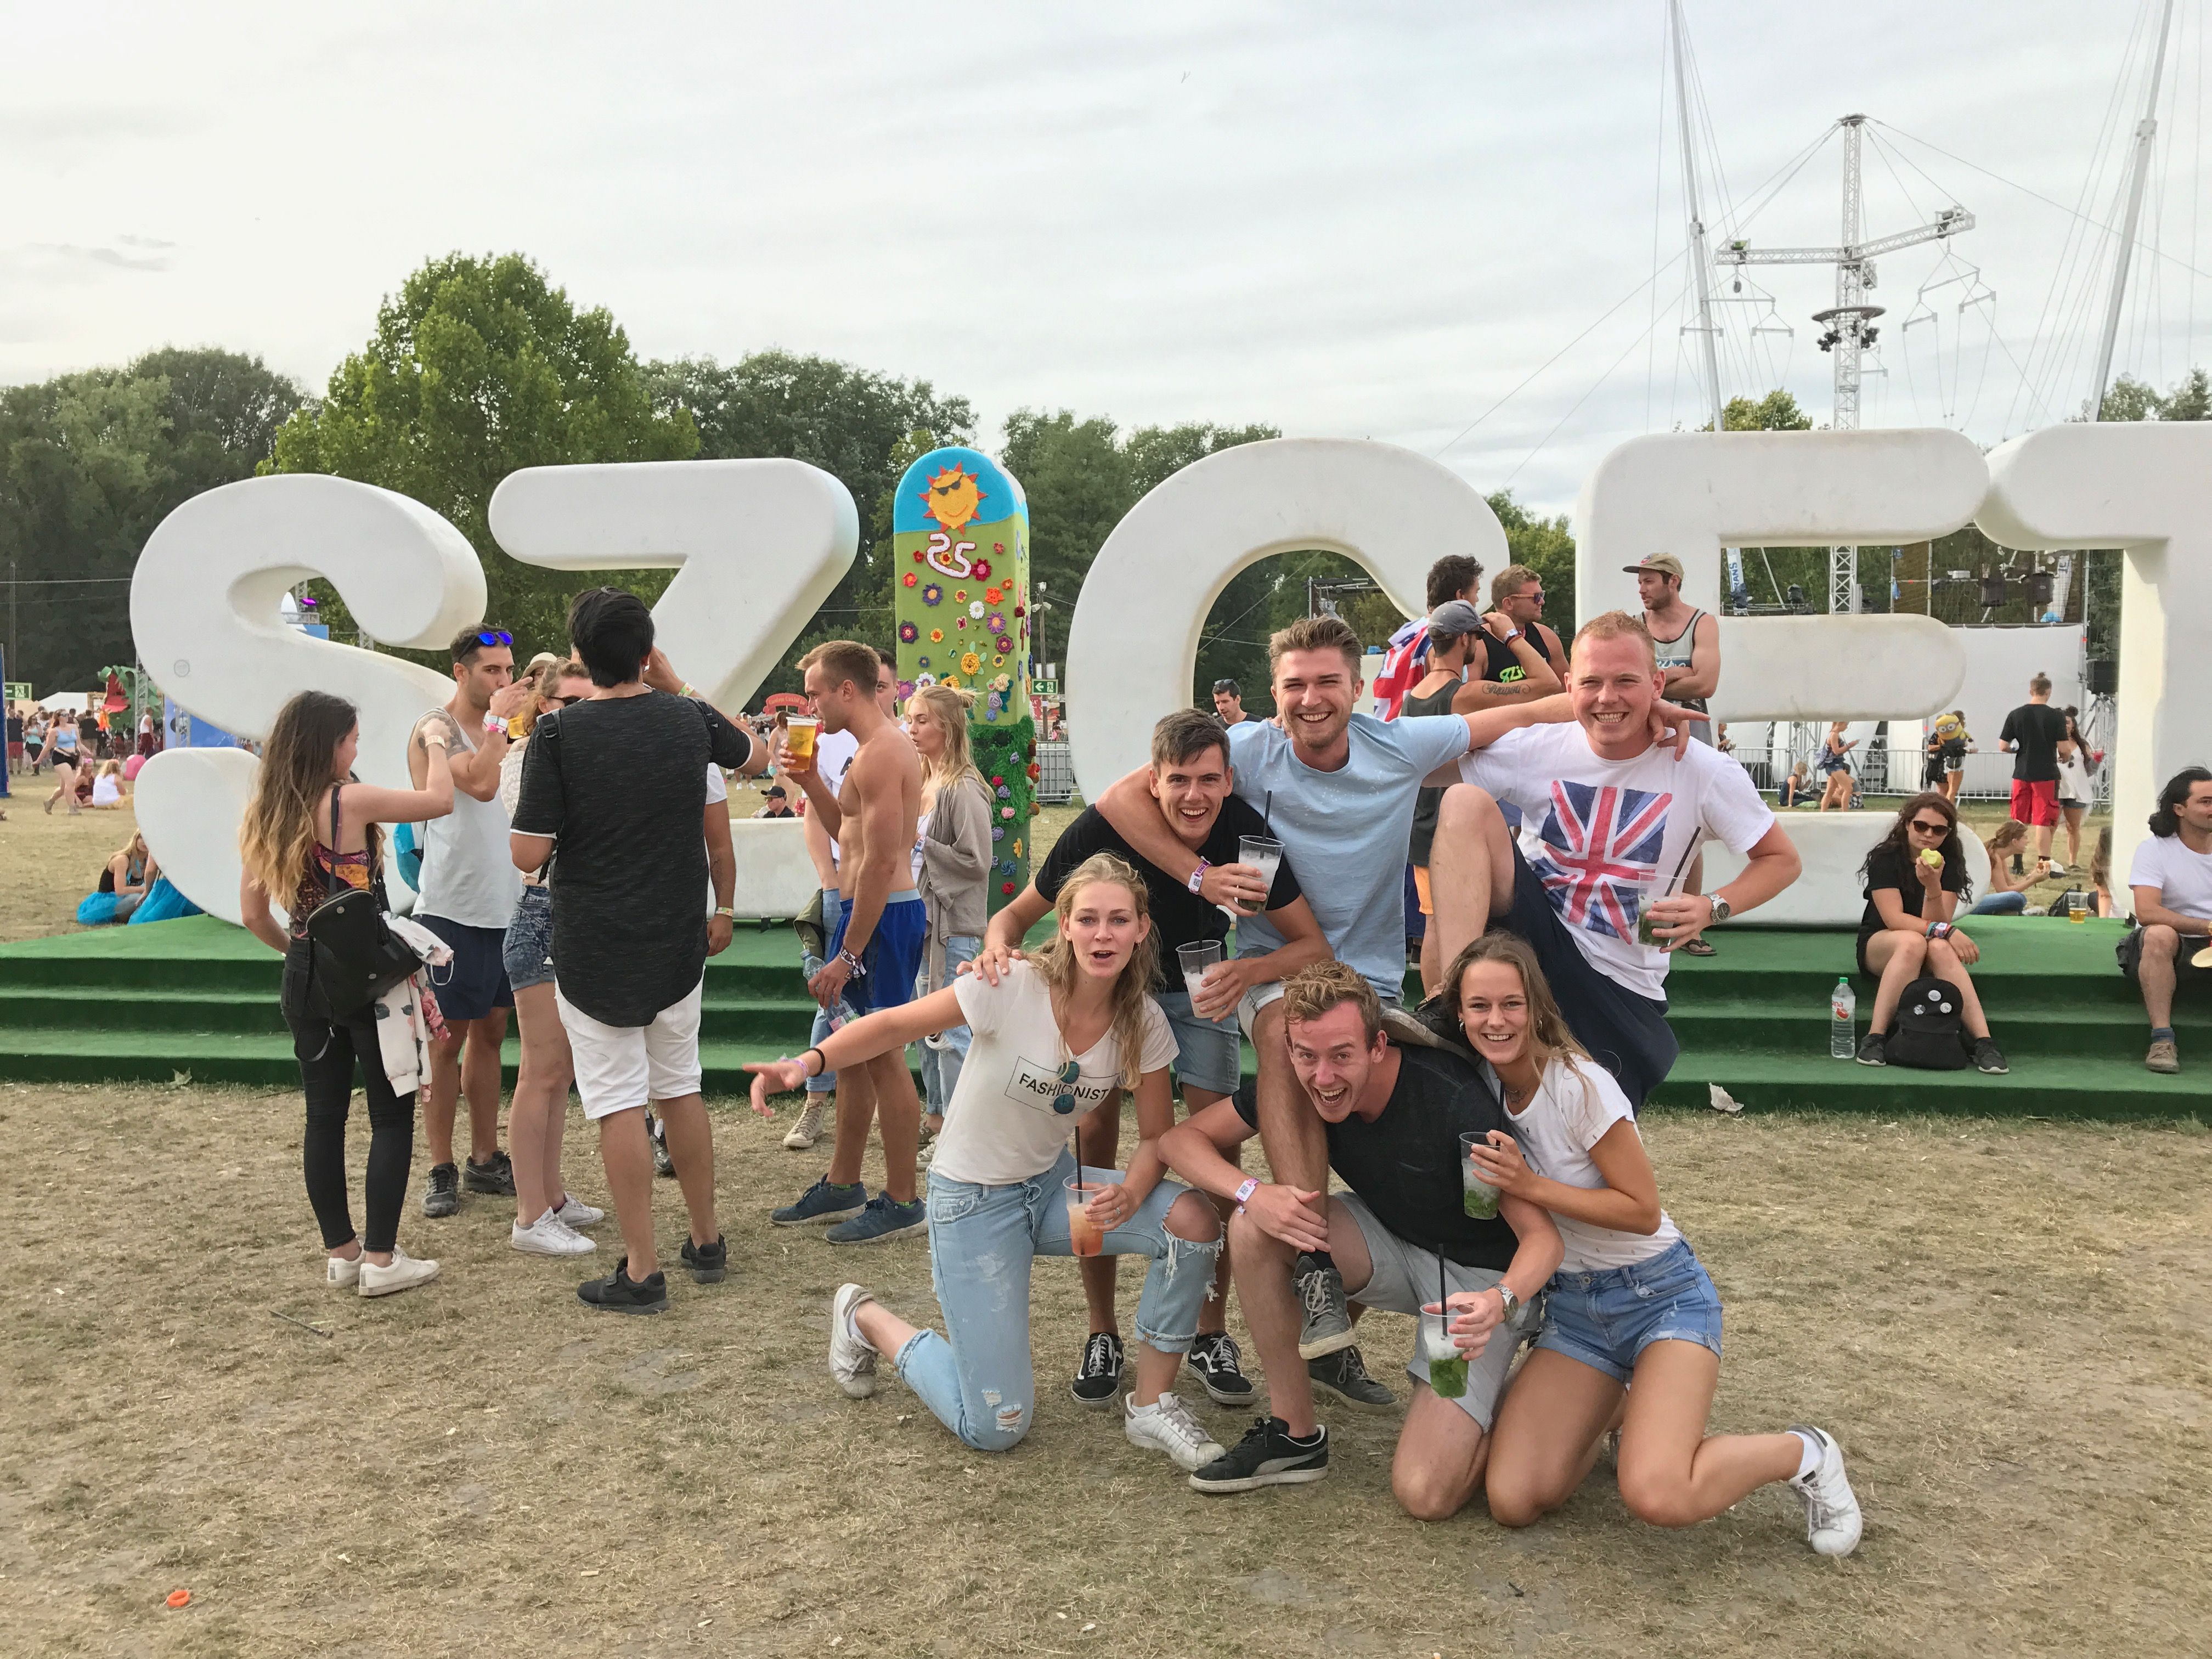 Groups photo at Sziget.